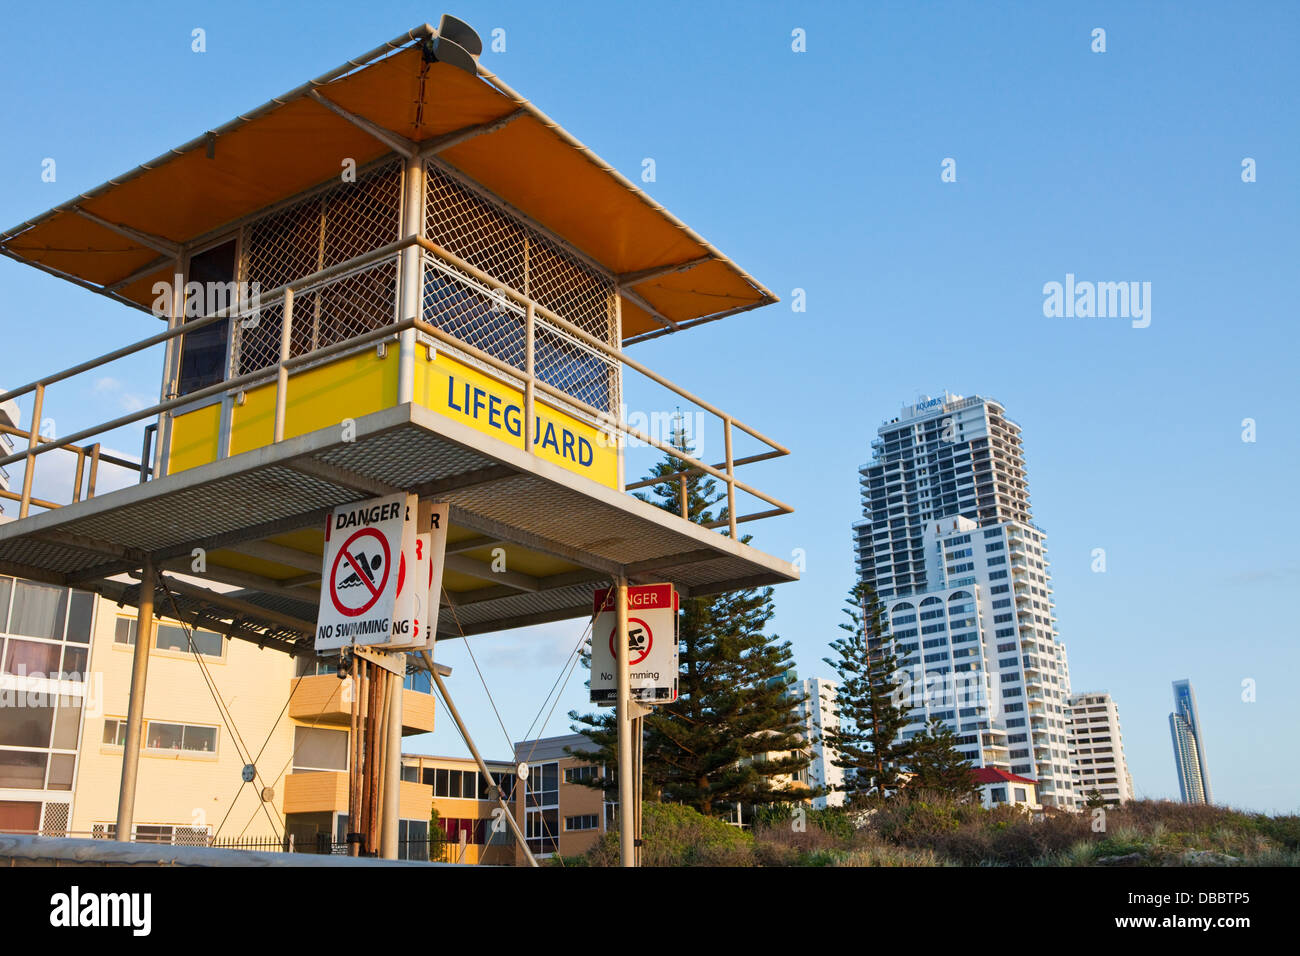 Lifeguard tower overlooking the beach at Surfers Paradise, Gold Coast, Queensland, Australia Stock Photo